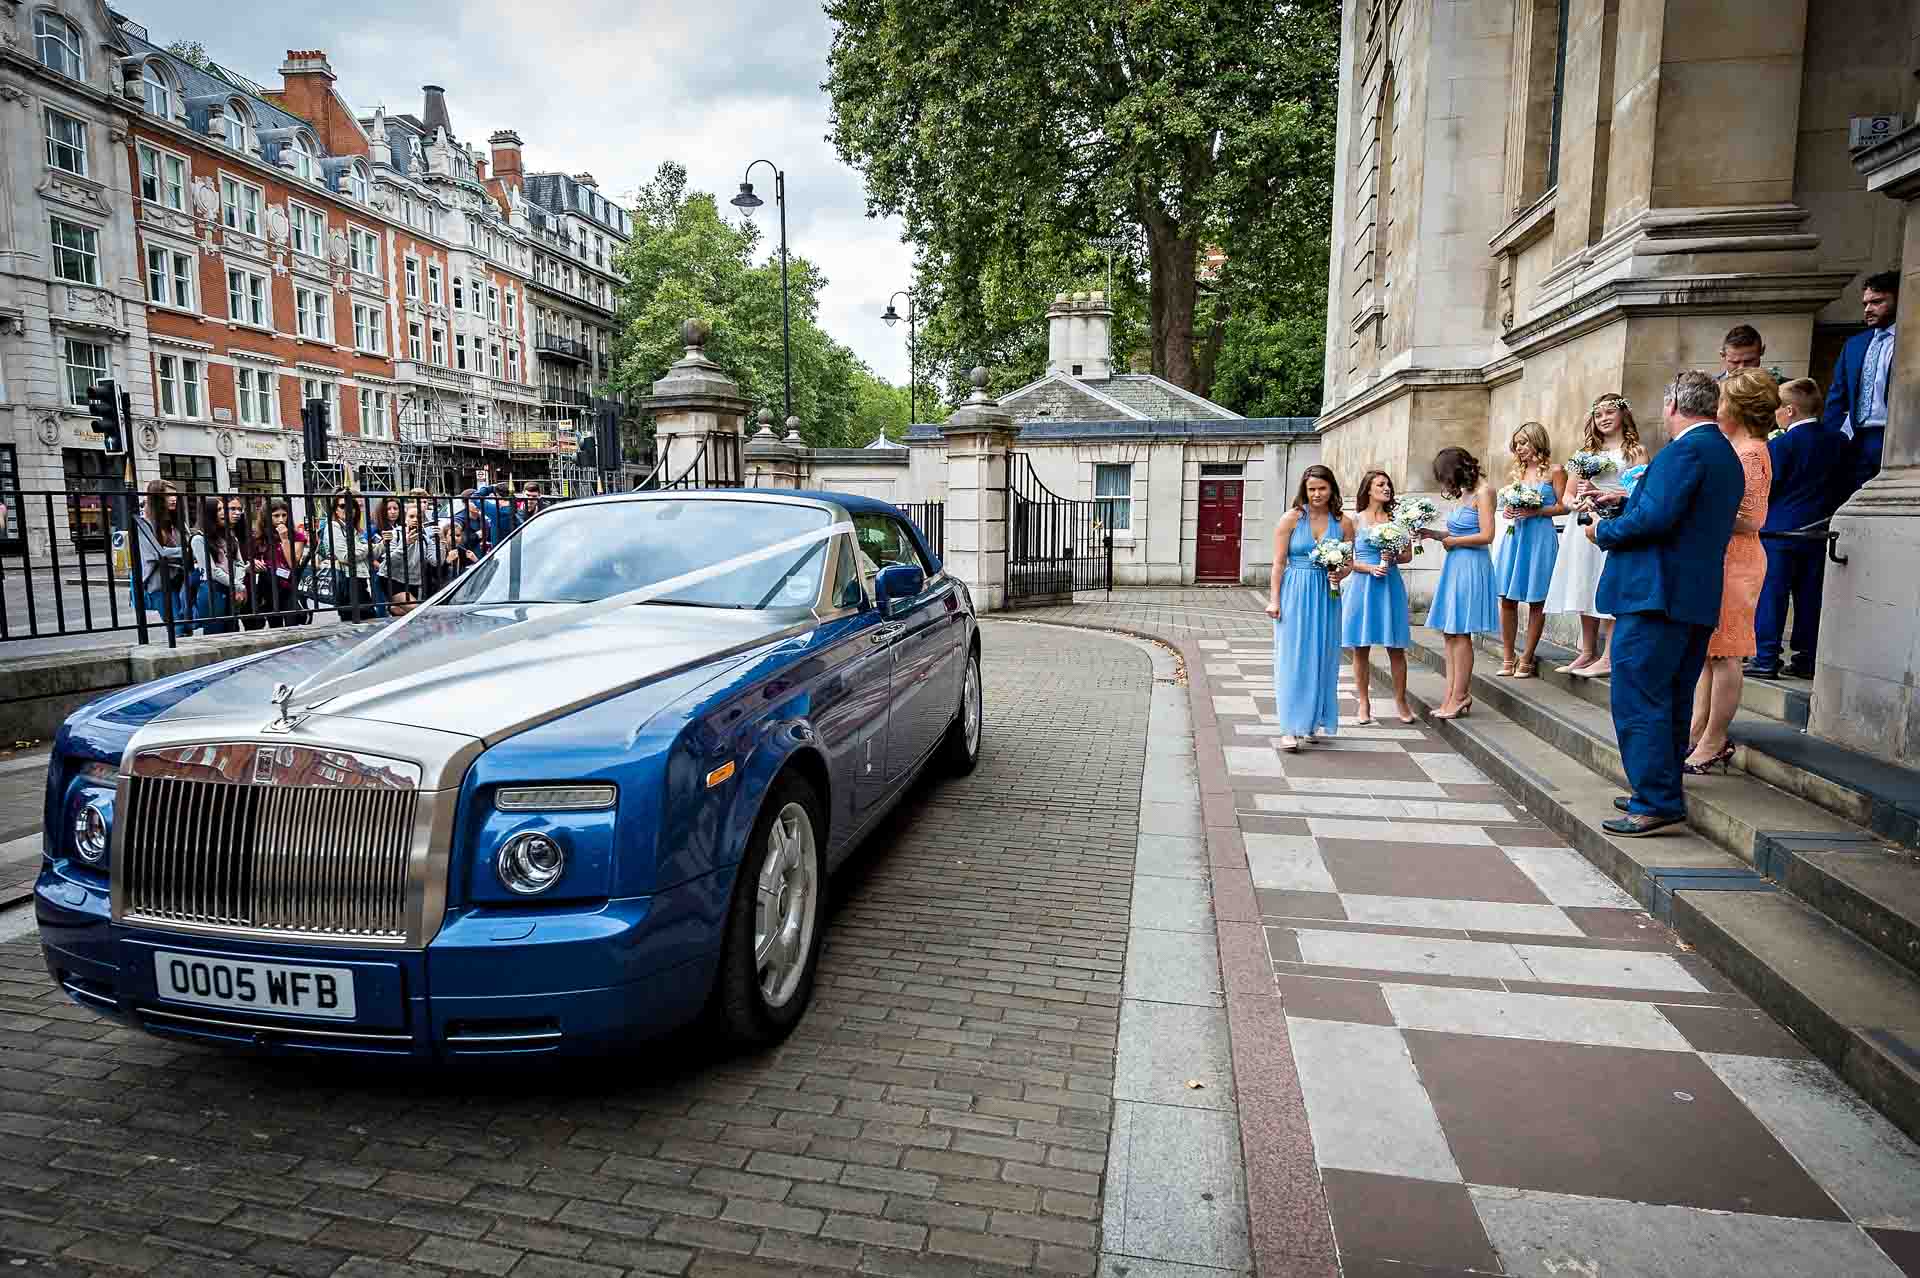 Blue and silver Rolls Royce outside Brompton Oratory for wedding